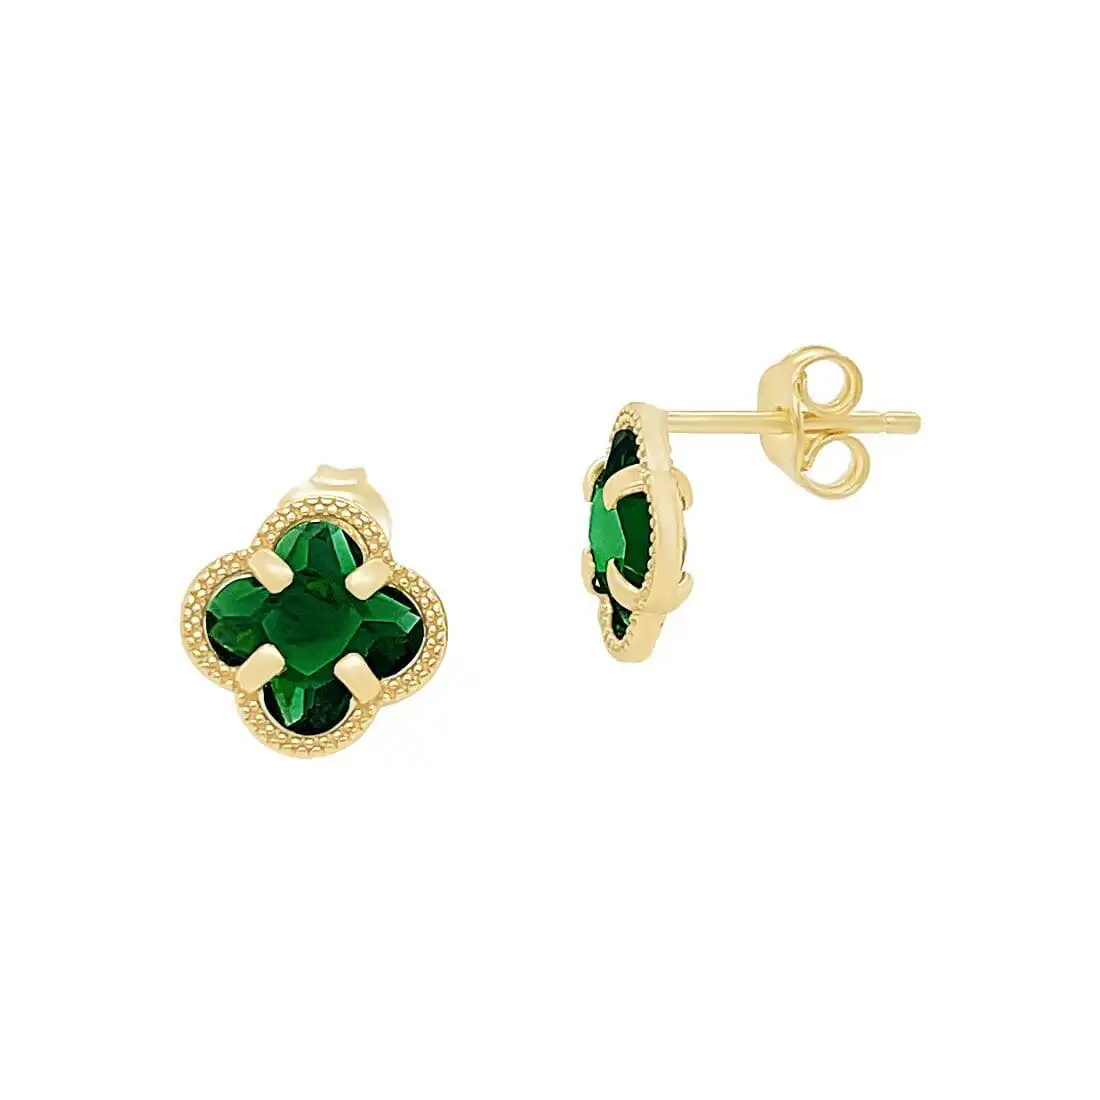 9ct Yellow Gold Silver Infused Green Stone Four Leaf Clover Stud Earrings